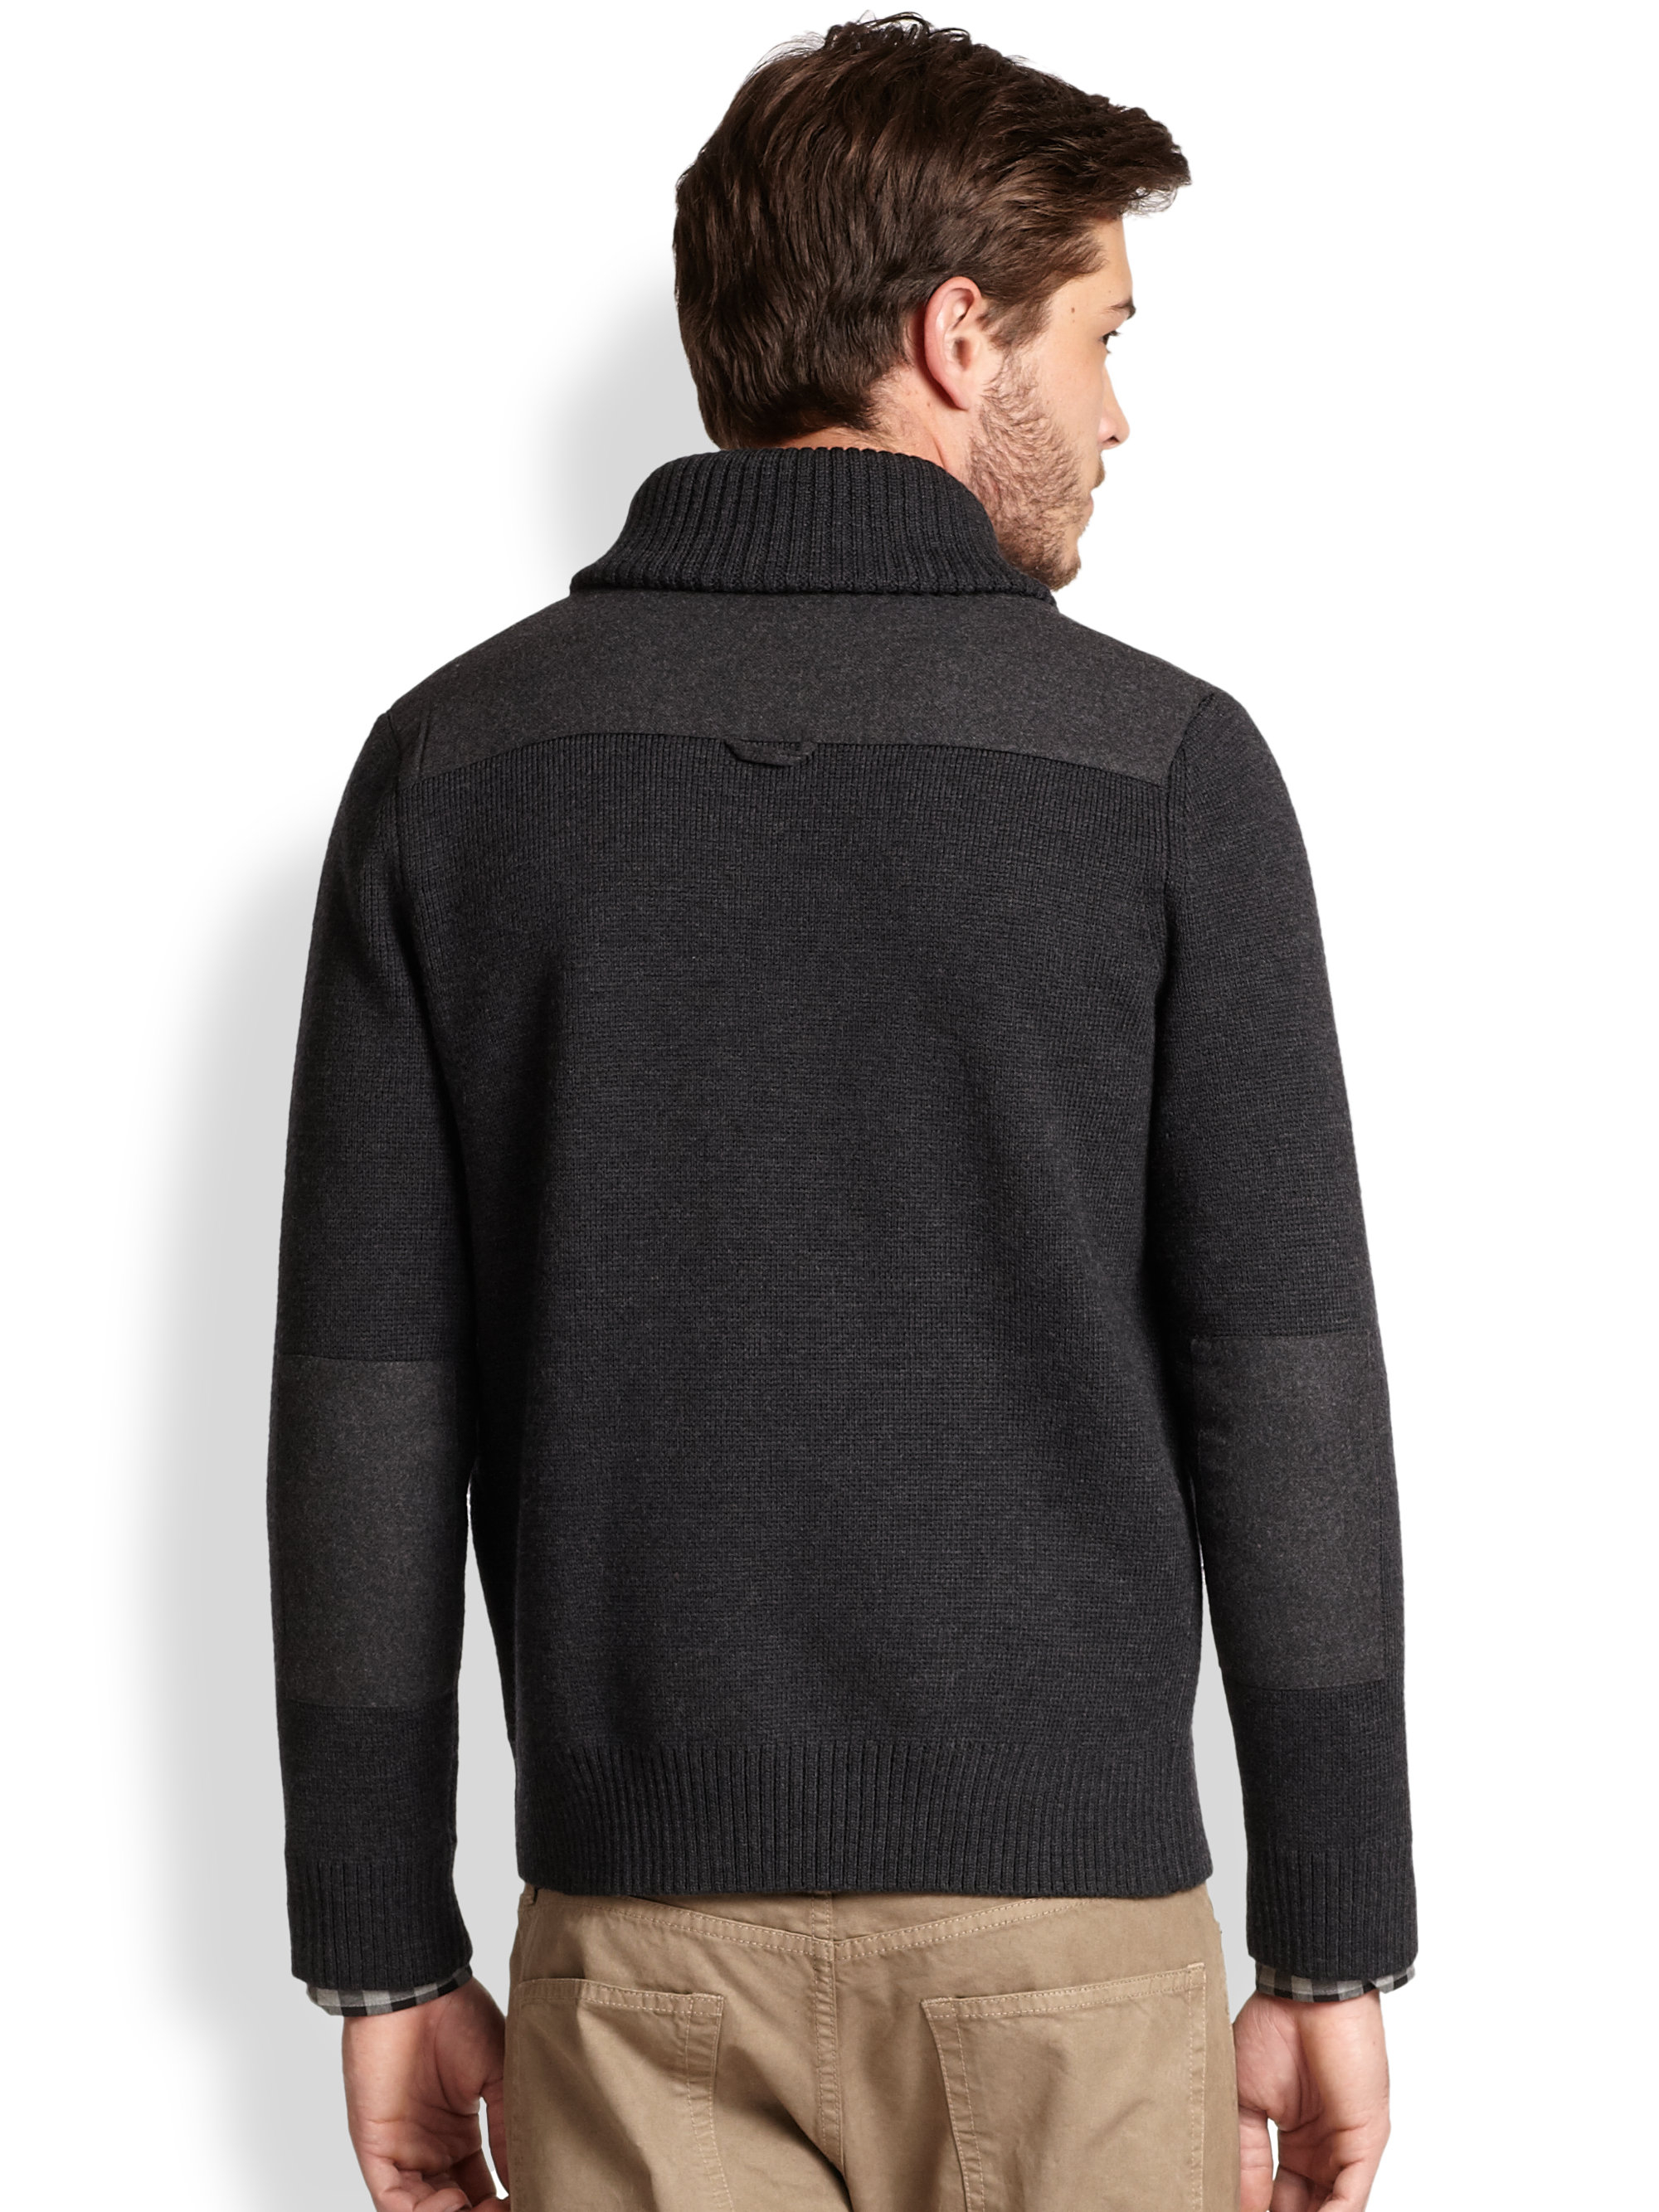 Lyst - Vince Double-Breasted Wool Sweater in Black for Men